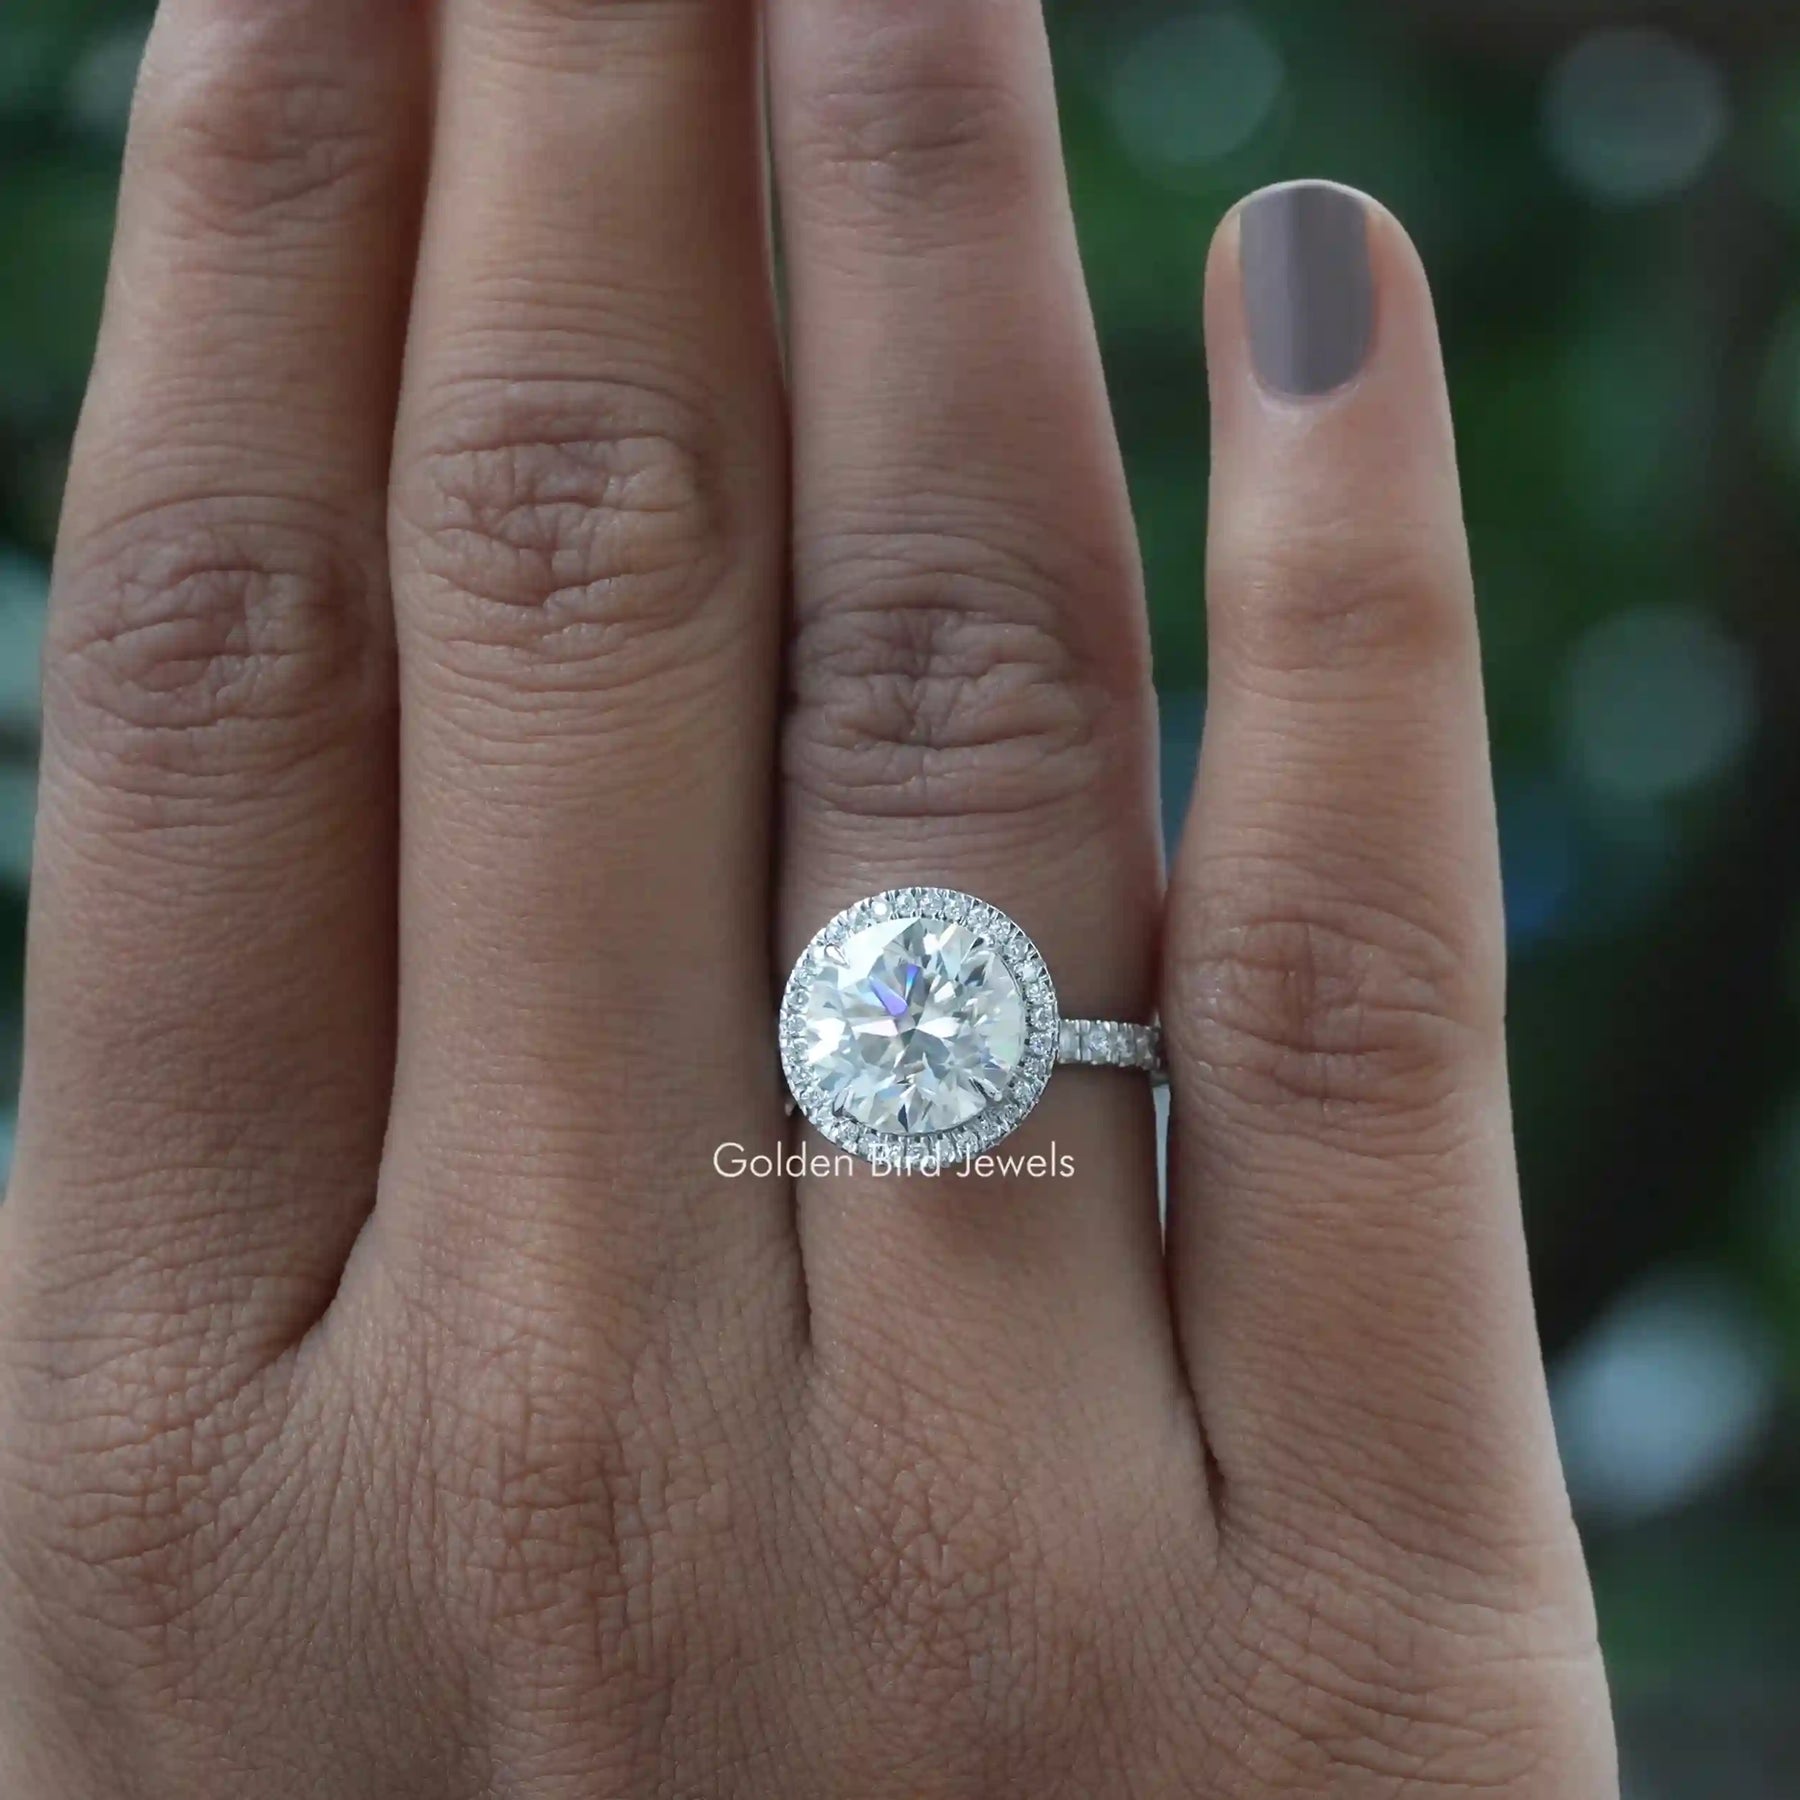 [Moissanite Round cut halo ring in vvs clarity]-[Golden Bird Jewels]